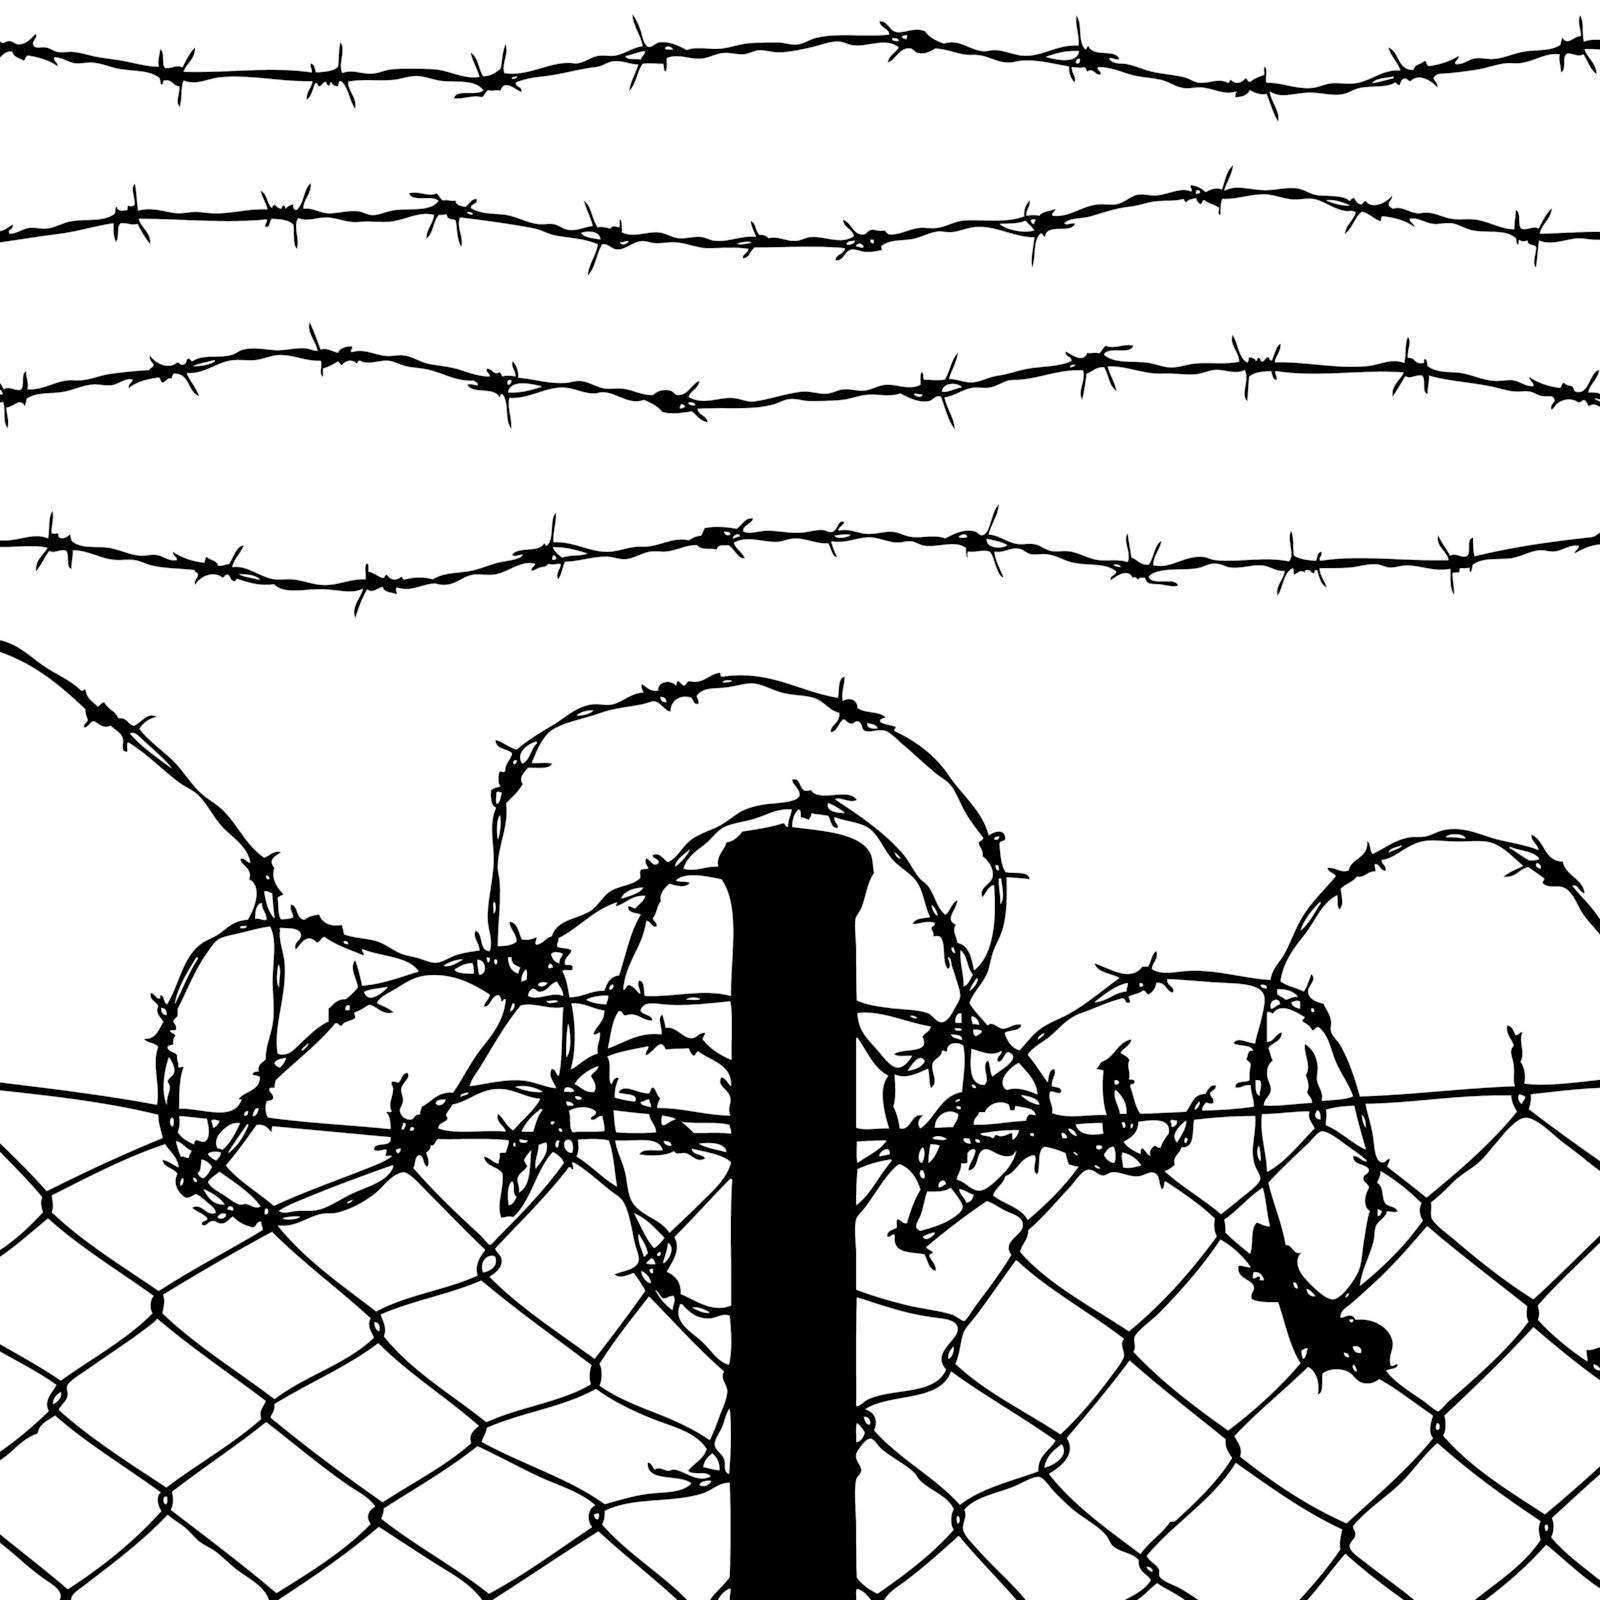 wired fence with barbed wires